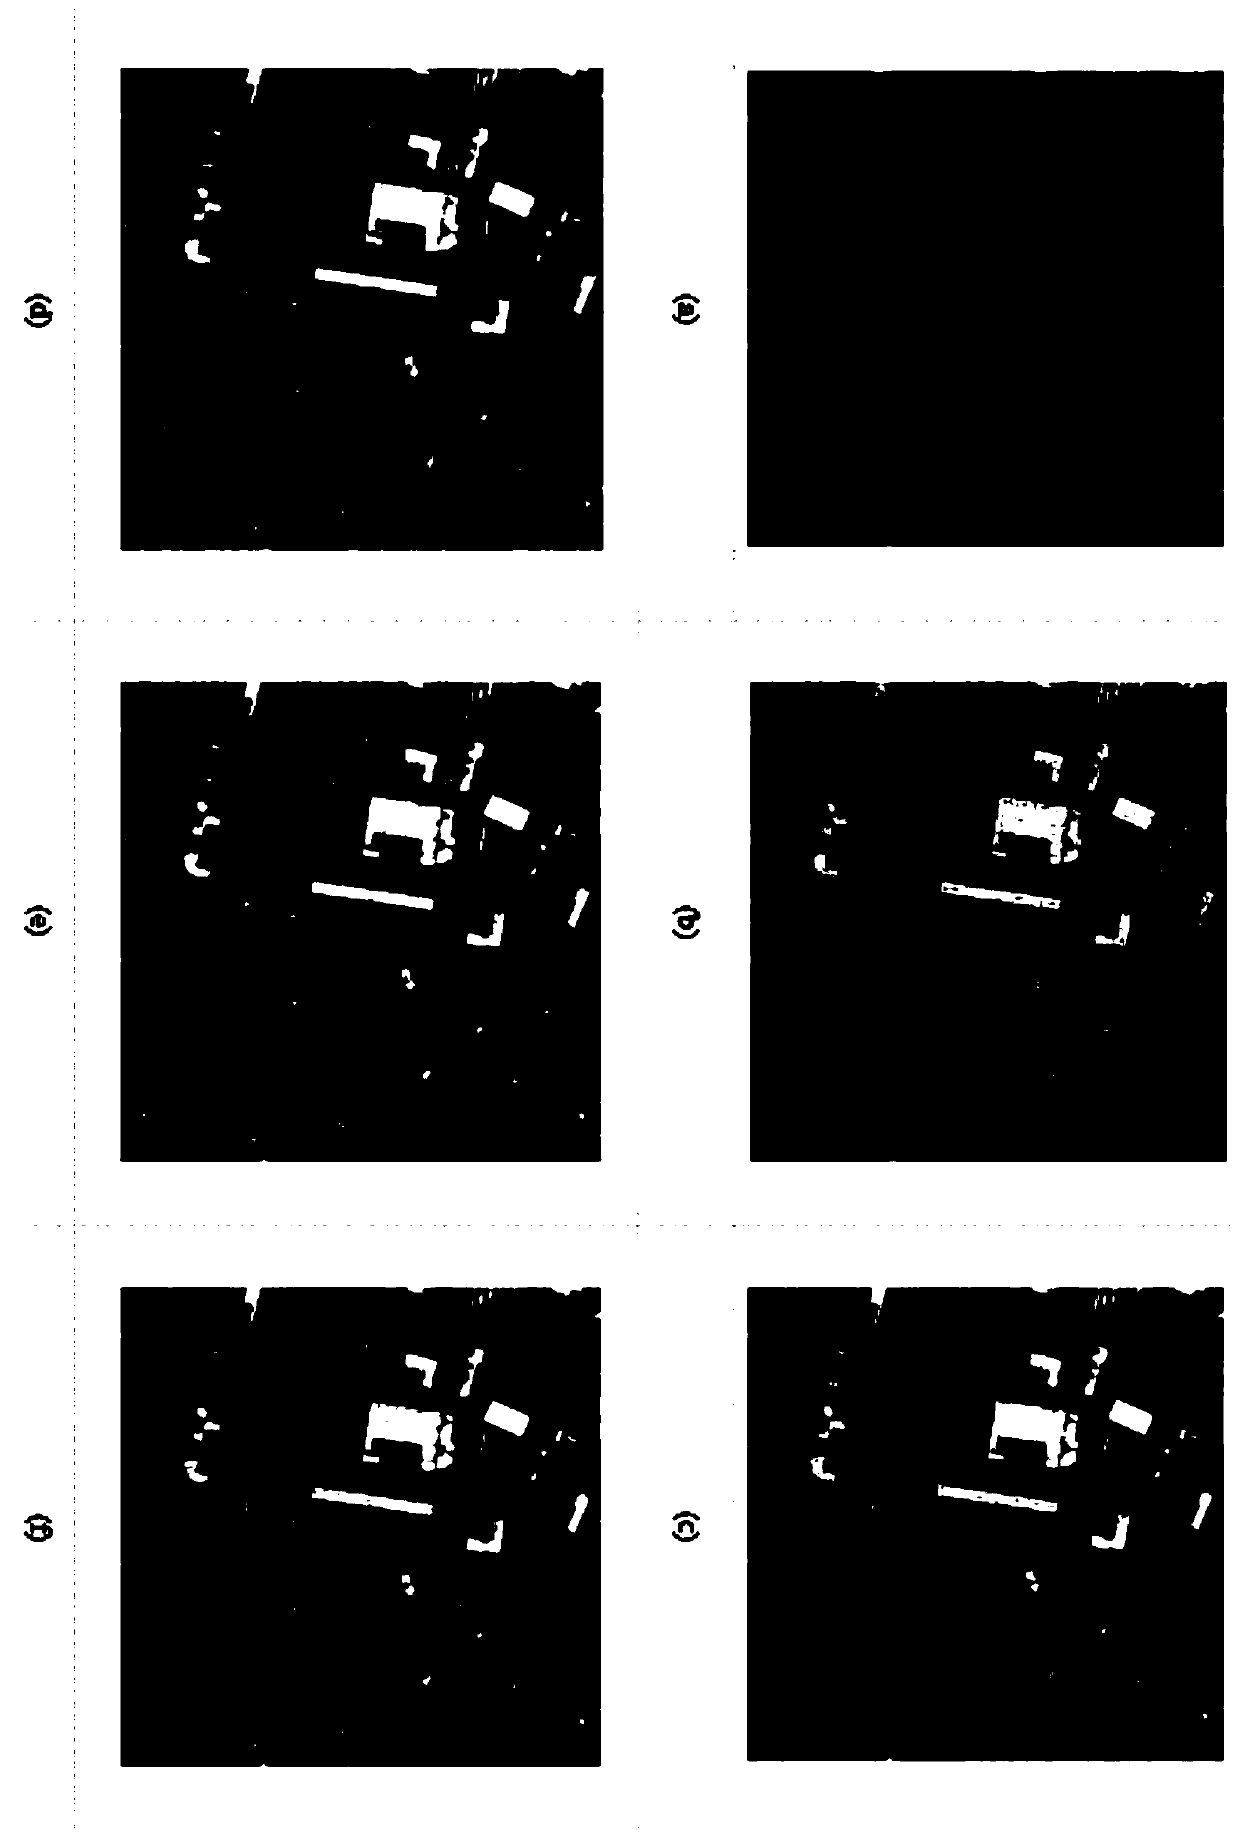 Satellite panchromatic and multispectral image fusion method based on multi-scale convolutional neural network